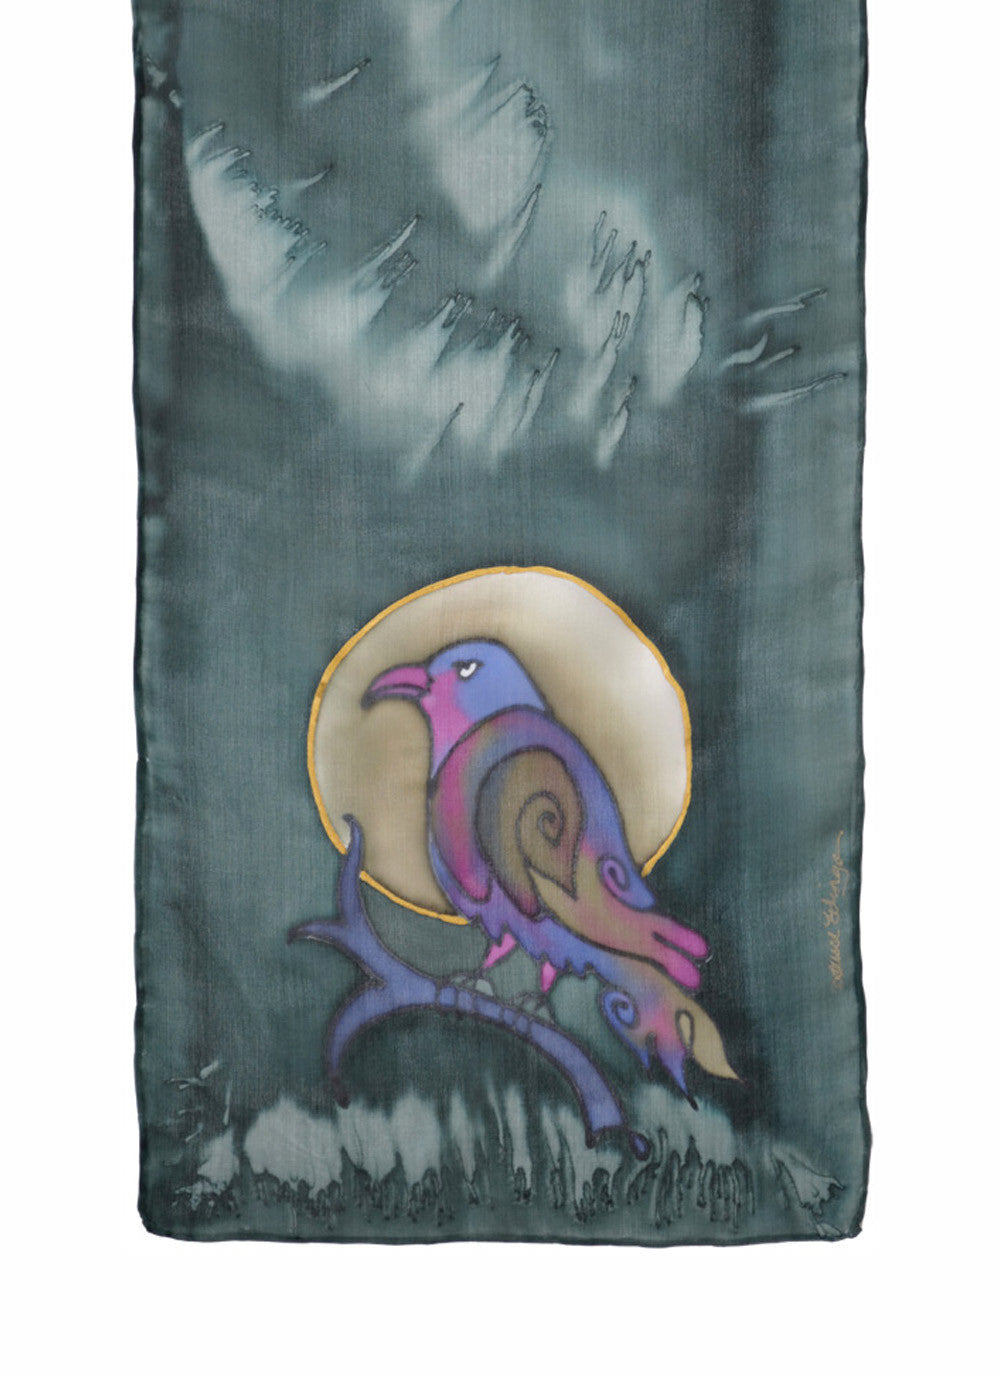 Hand-painted silk scarf raven design charcoal grey and purple